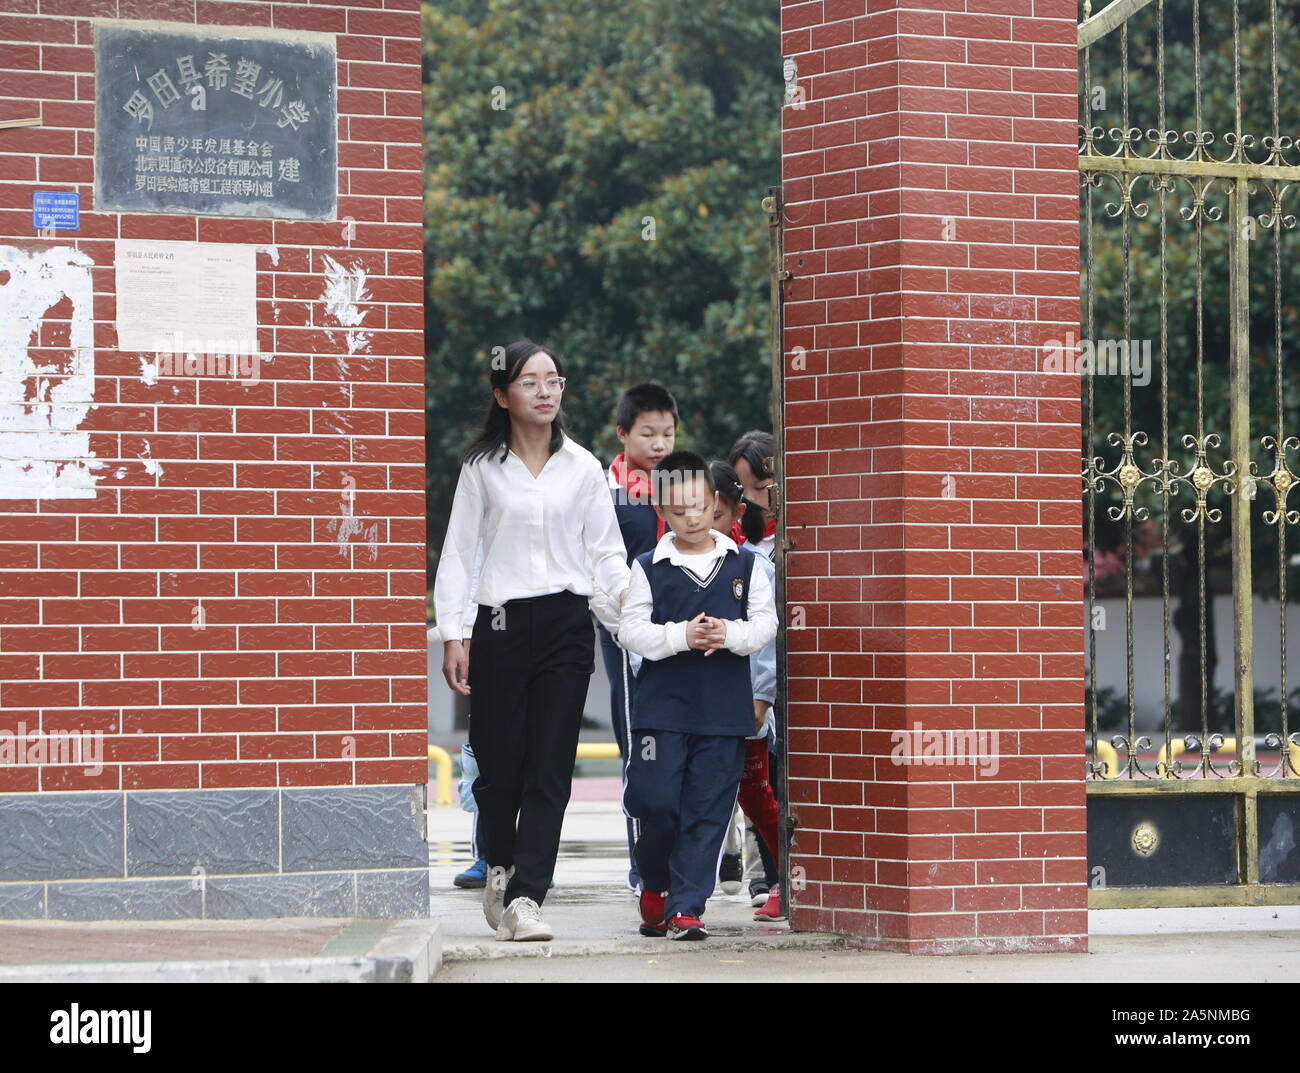 (191022) -- LUOTIAN, Oct. 22, 2019 (Xinhua) -- Fang Rong walks students home in Luotian County, central China's Hubei Province, Oct. 11, 2019. Fang Rong, 29, is the headmaster of Hope primary school of Luotian County, her alma mater. Born in a poverty-stricken region, Fang Rong was a left-behind girl. Thanks to the Hope Project and people's aids, she succeeded in graduating from a secondary normal school. To help more children and repay people's kindness, she decided to be a teacher at her alma mater. In spite of the austere way of life, Fang shouldered her responsibility from various asp Stock Photo